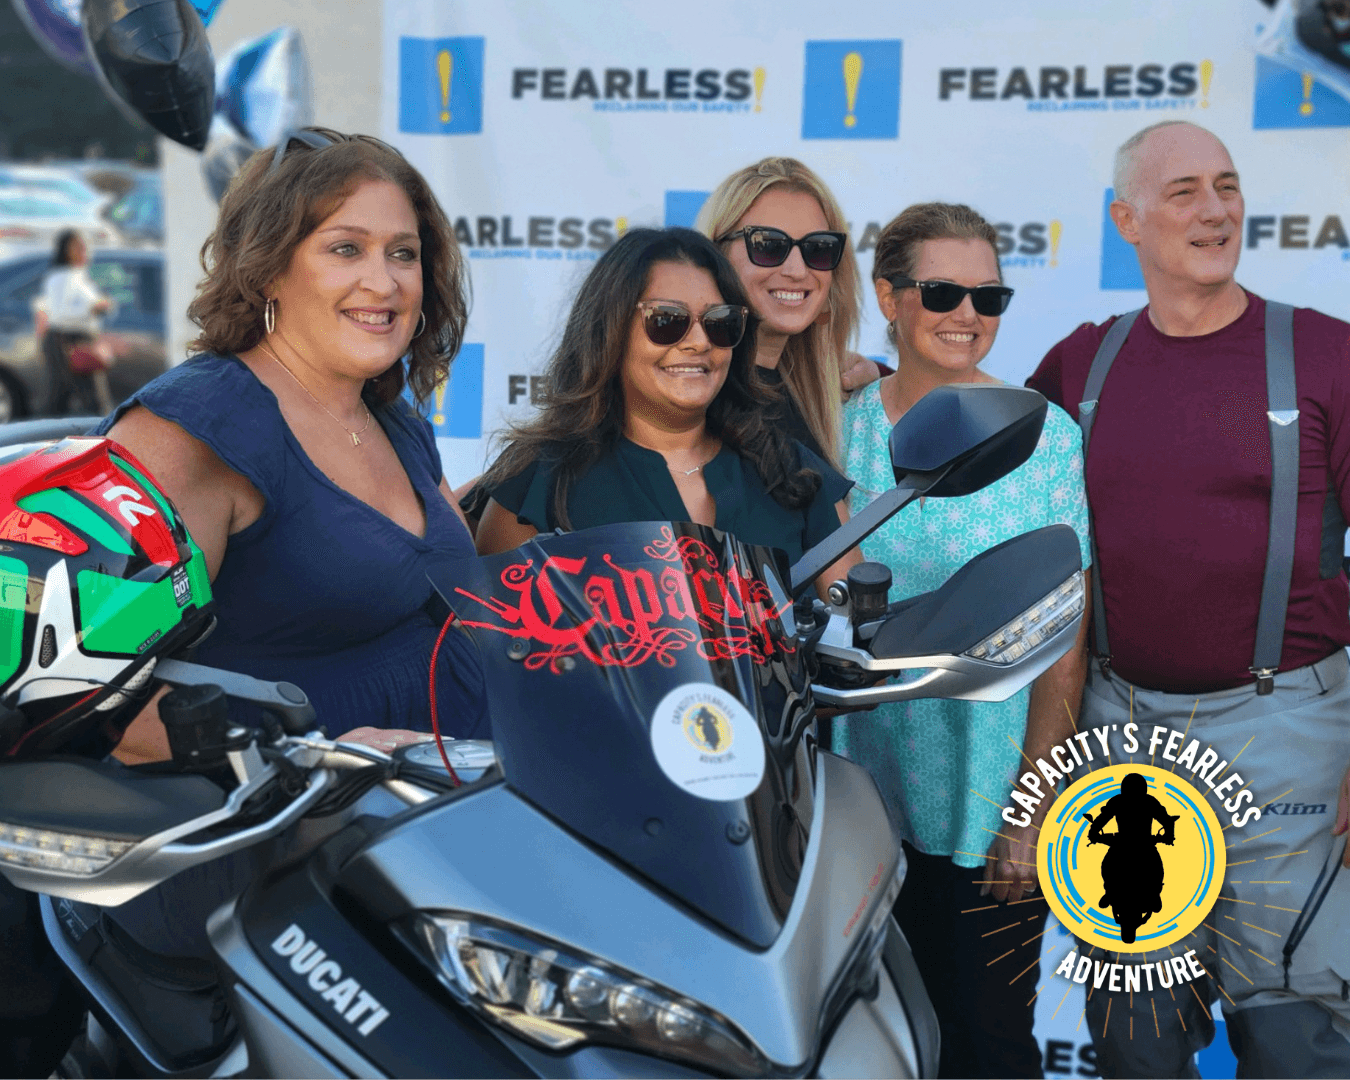 Hudson Valley motorcyclist embarks on 7,000-mile 'Fearless Adventure' to raise money for domestic violence survivors